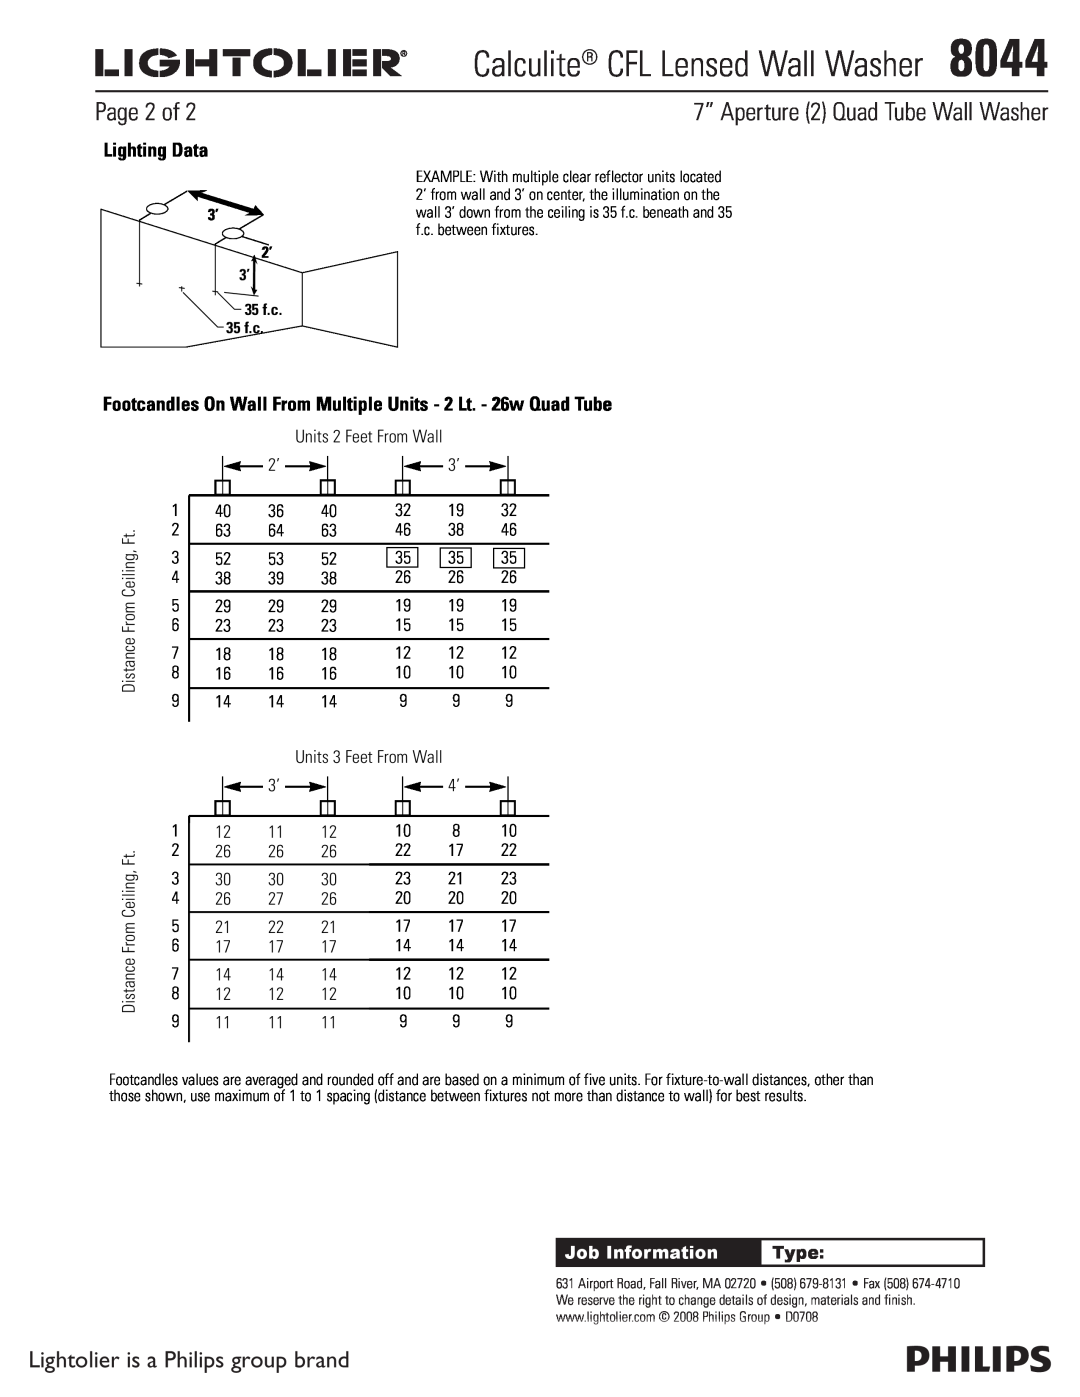 Lightolier Page 2 of, Calculite CFL Lensed Wall Washer8044, 7” Aperture 2 Quad Tube Wall Washer, Lighting Data, Type 